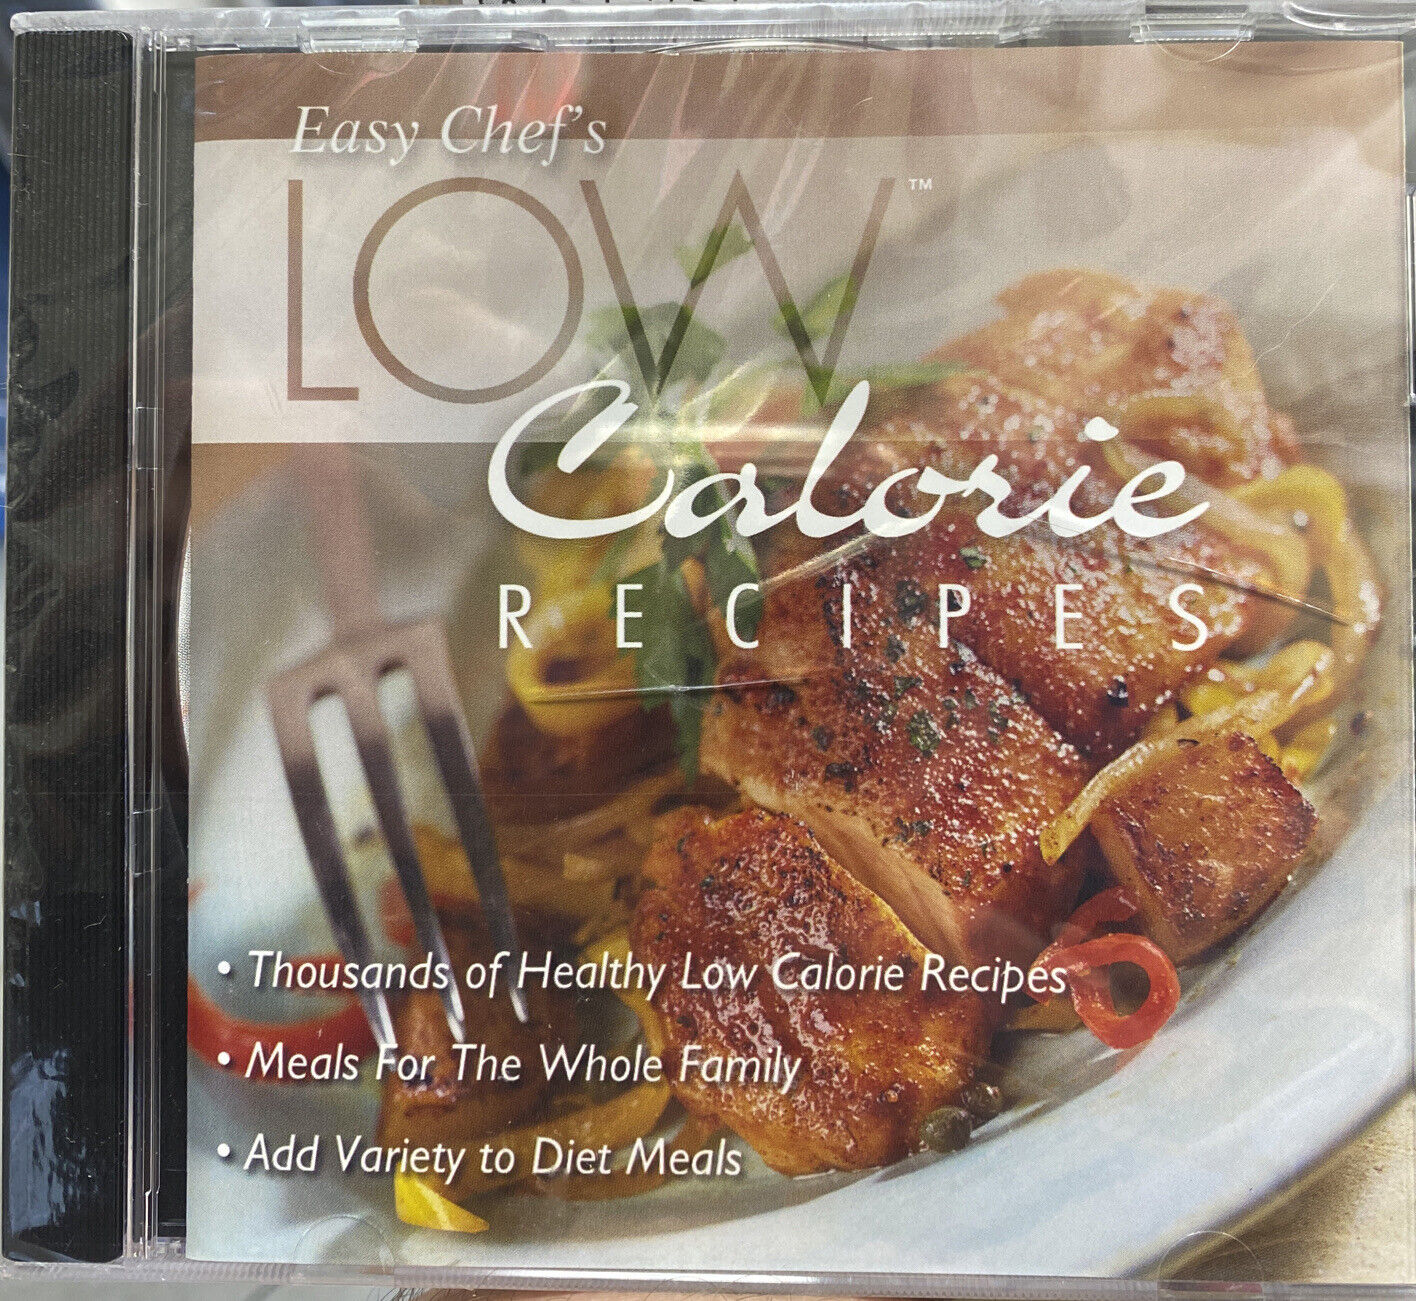 Easy Chef\'s: Low Calorie Recipes PC CD-ROM for Windows Sealed